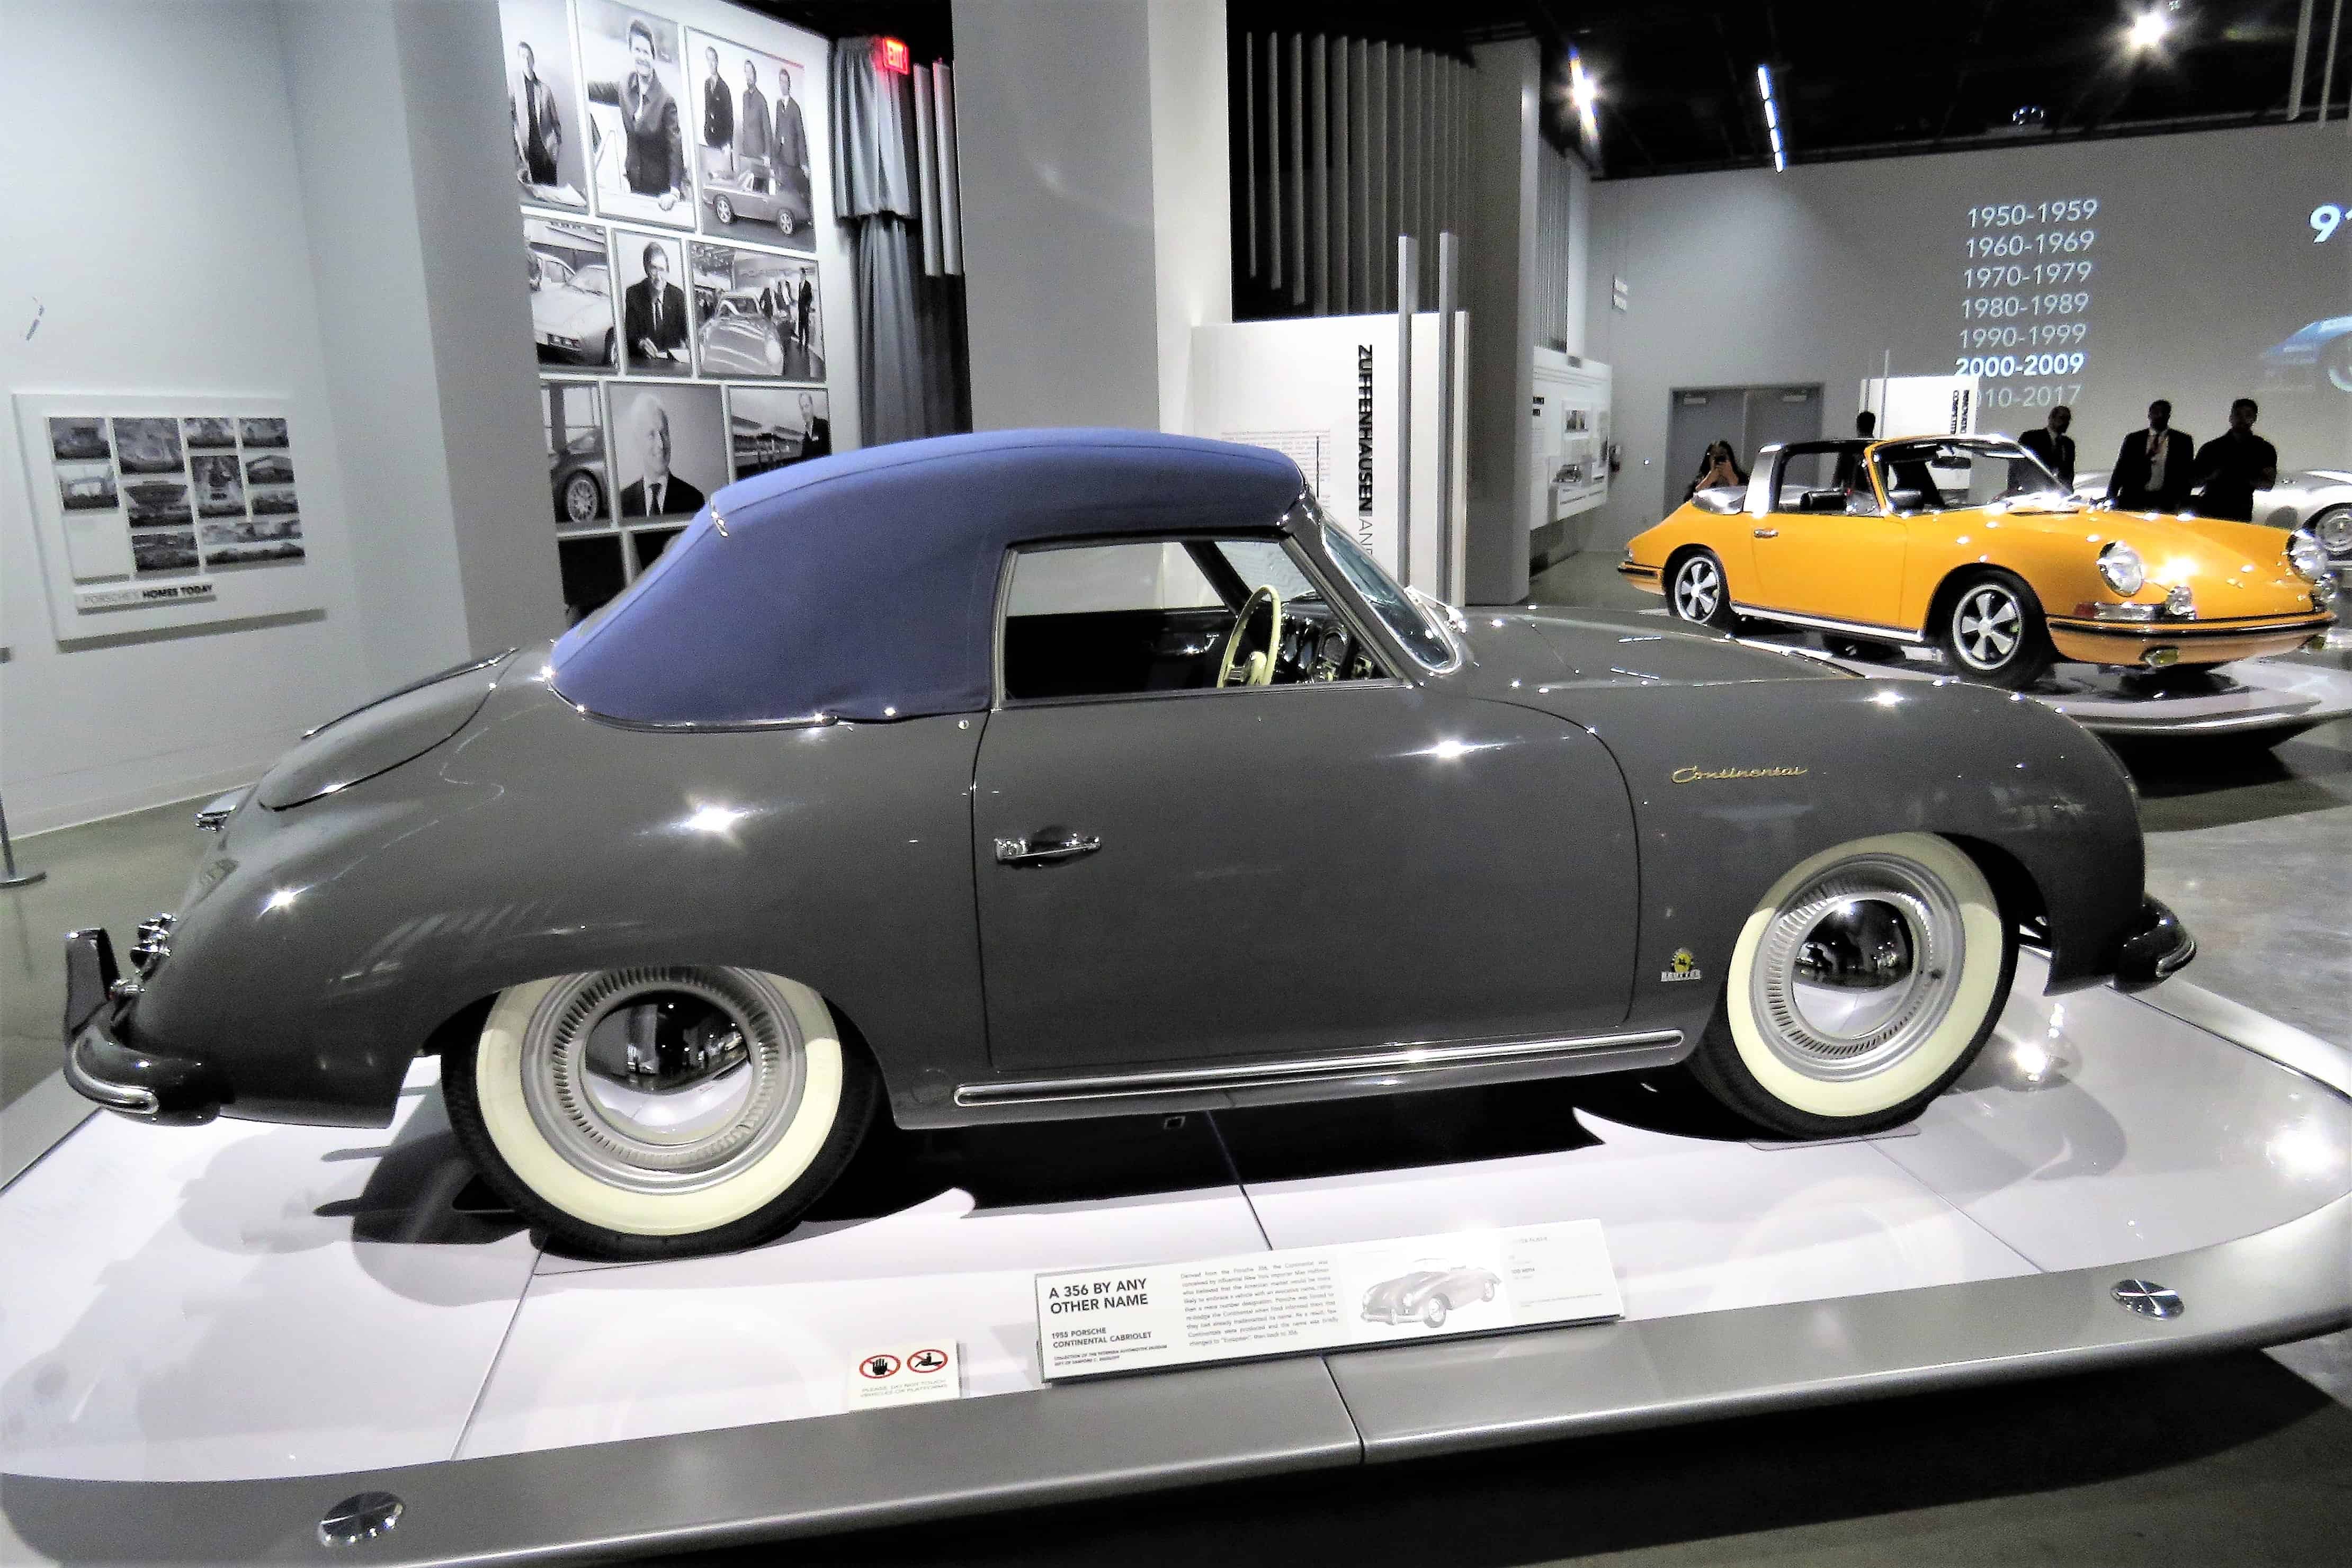 LA Classic Auto Show draws vehicles from SoCal museums | ClassicCars